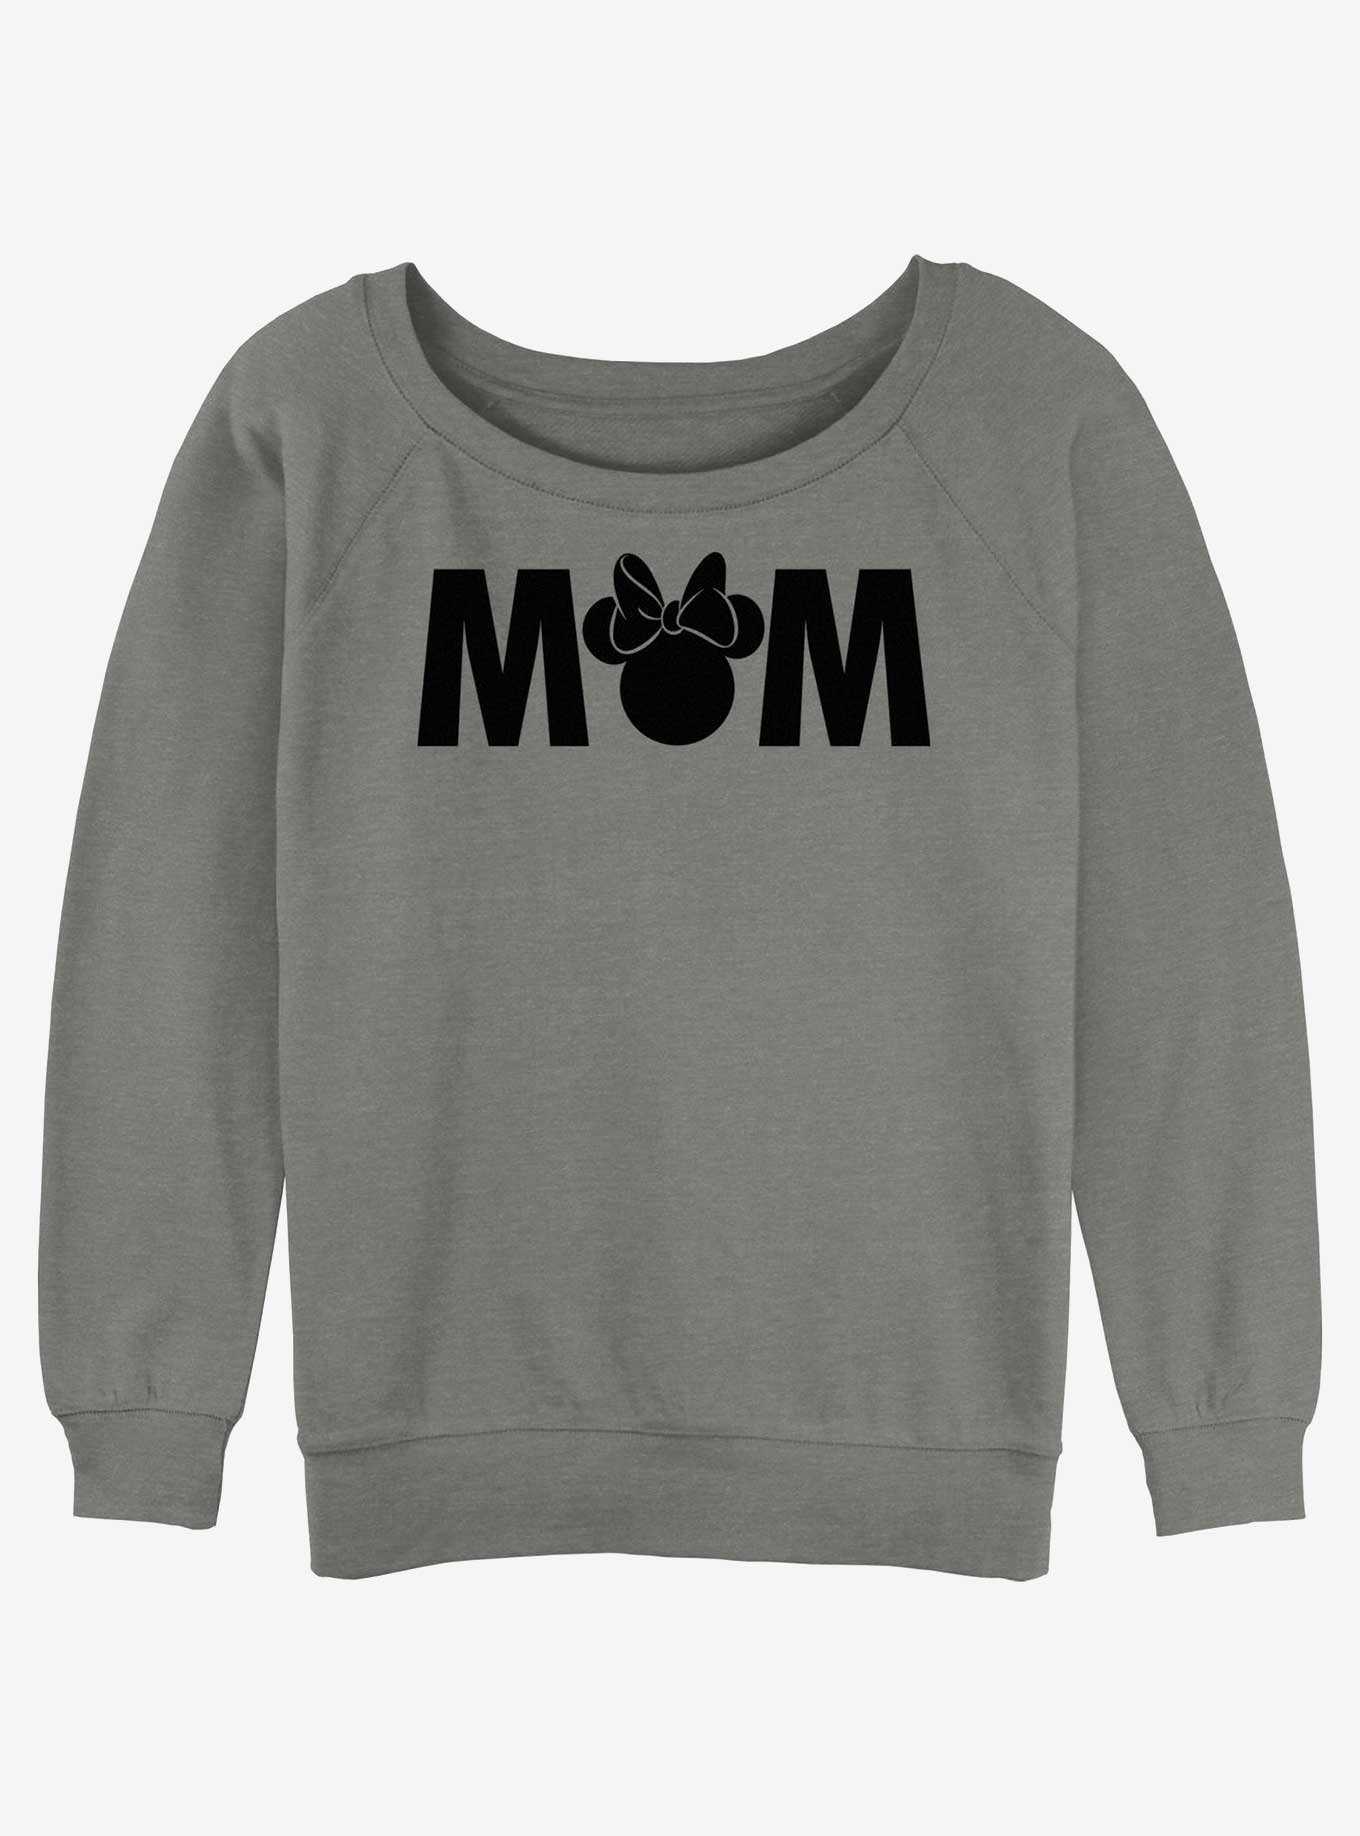 Disney Mickey Mouse Minnie Mouse Mom Womens Slouchy Sweatshirt, , hi-res